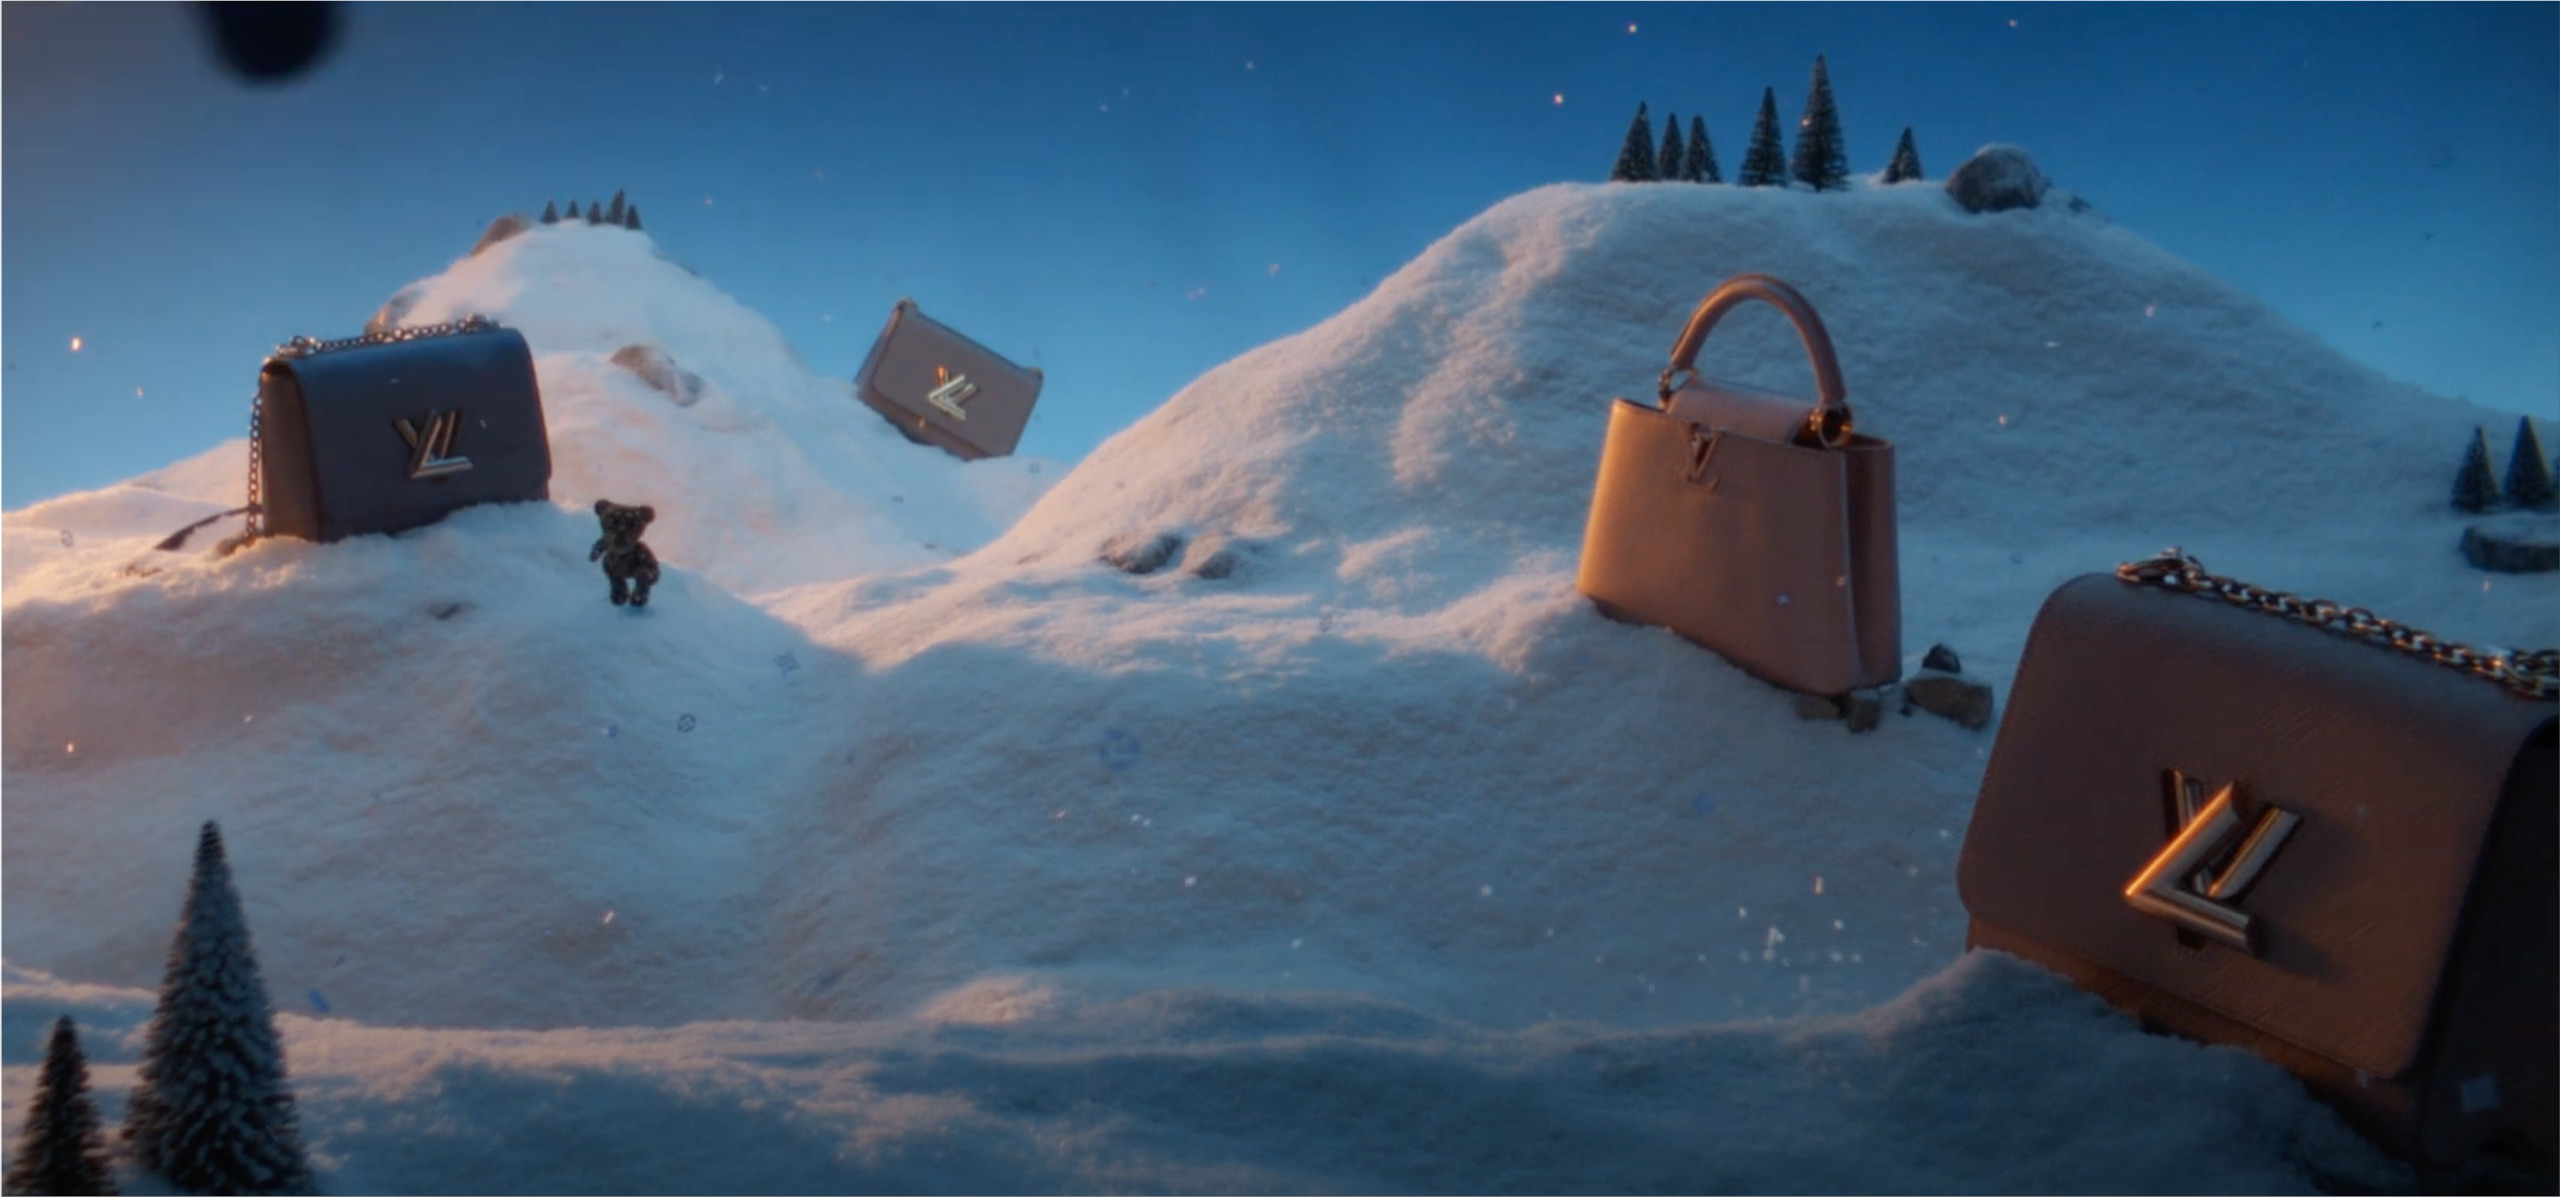 How the Mill Paris Artists Animated the Louis Vuitton Holiday Campaign